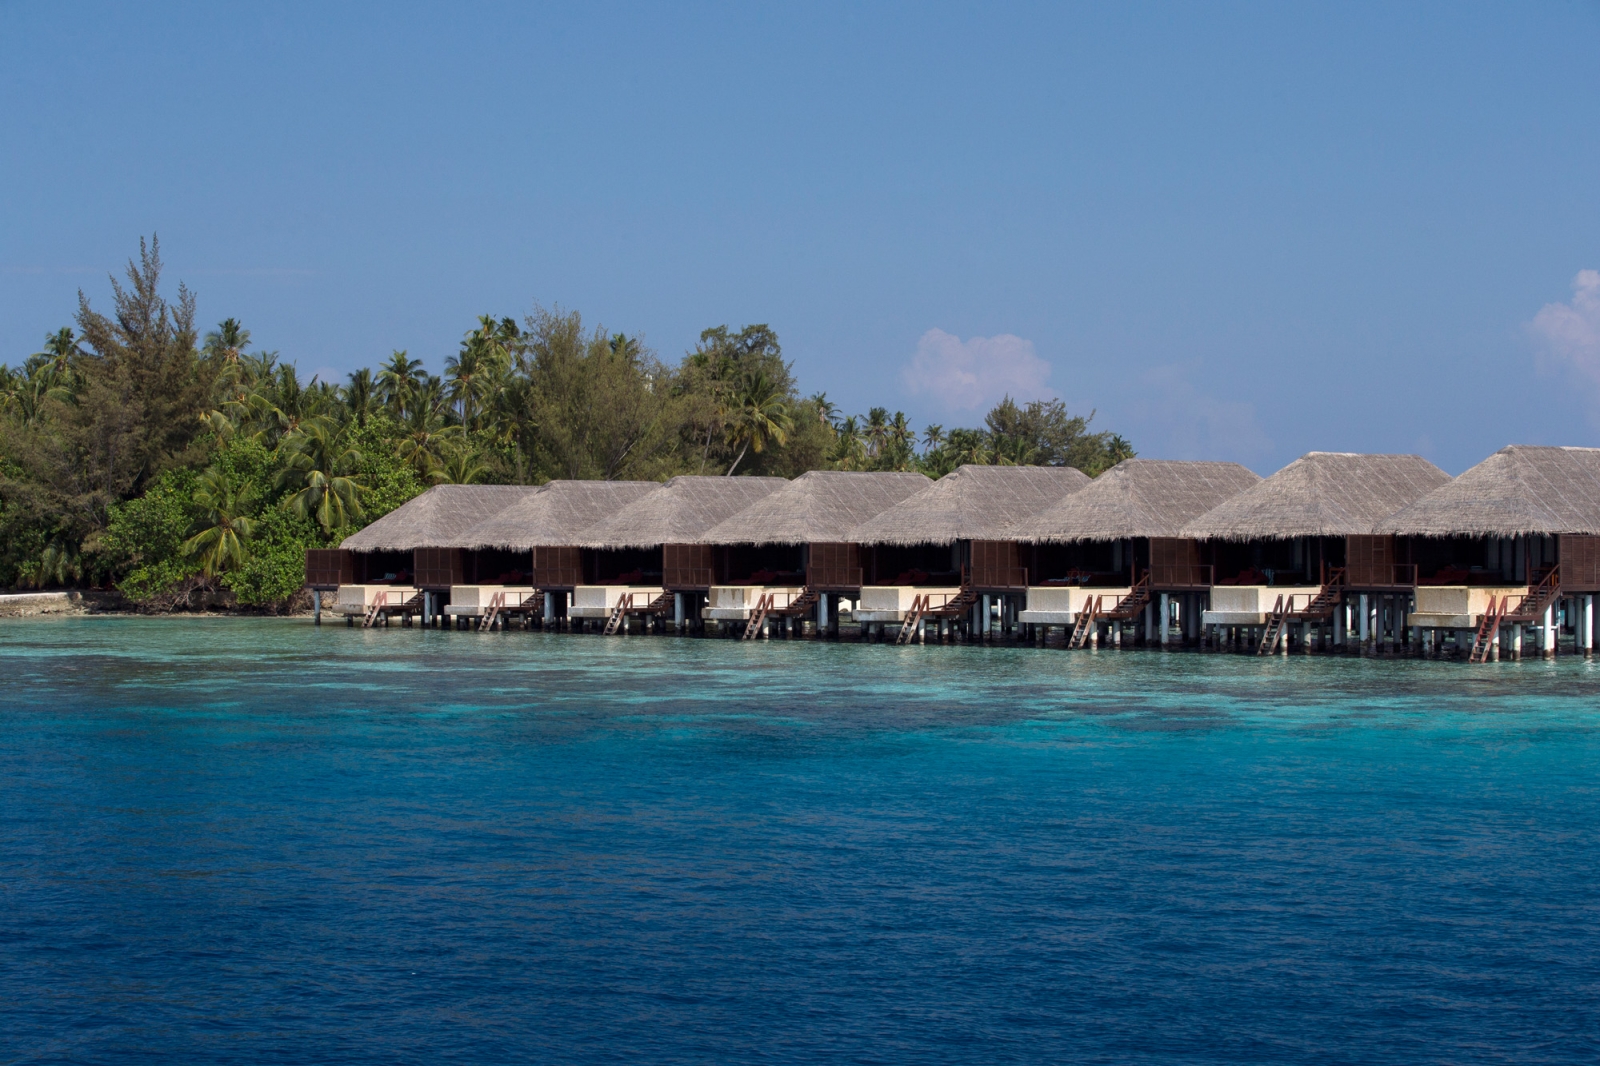 content/hotel/Coco Bodu Hithi/Accommodation/Water Villa/CocoBodu-Acc-WaterVilla-03.jpg